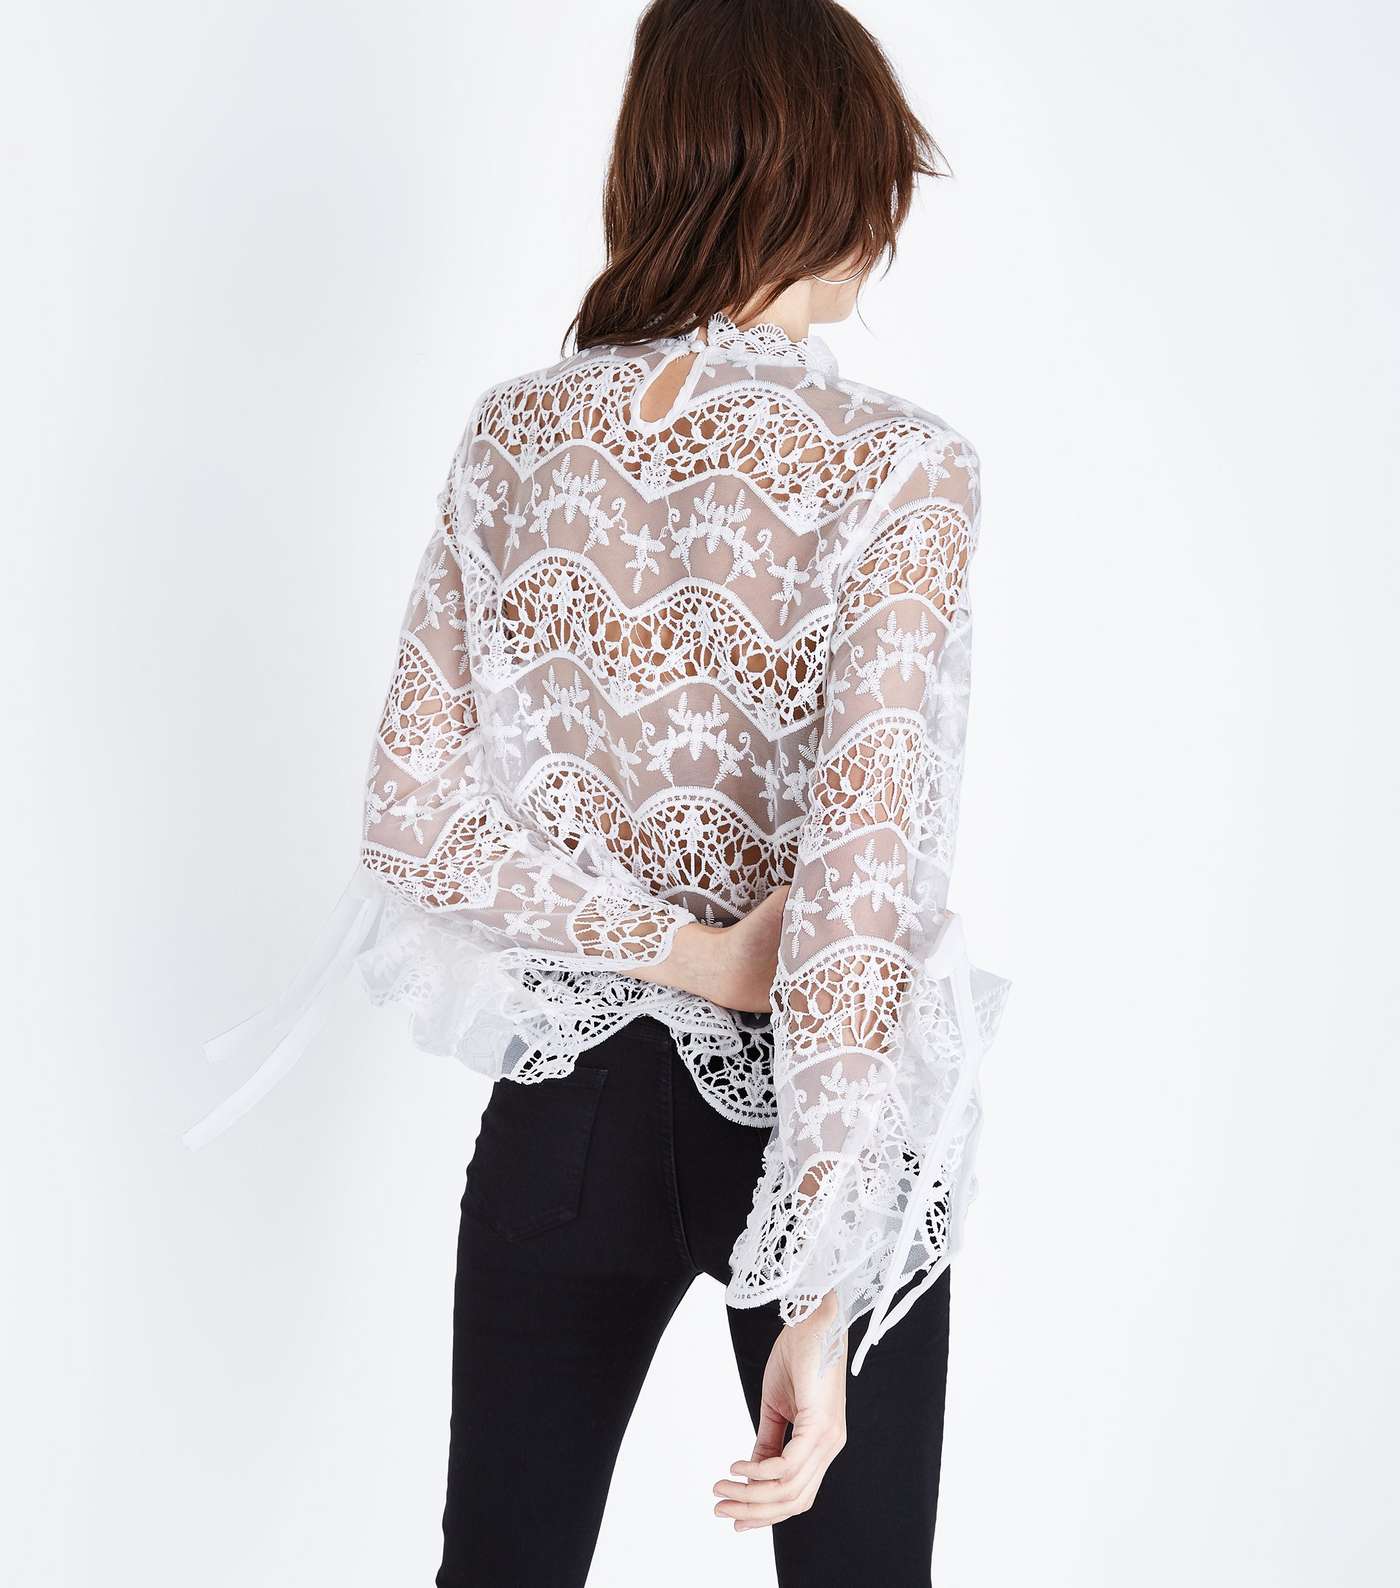 Parisian White Lace Frill Sleeve Top Image 3